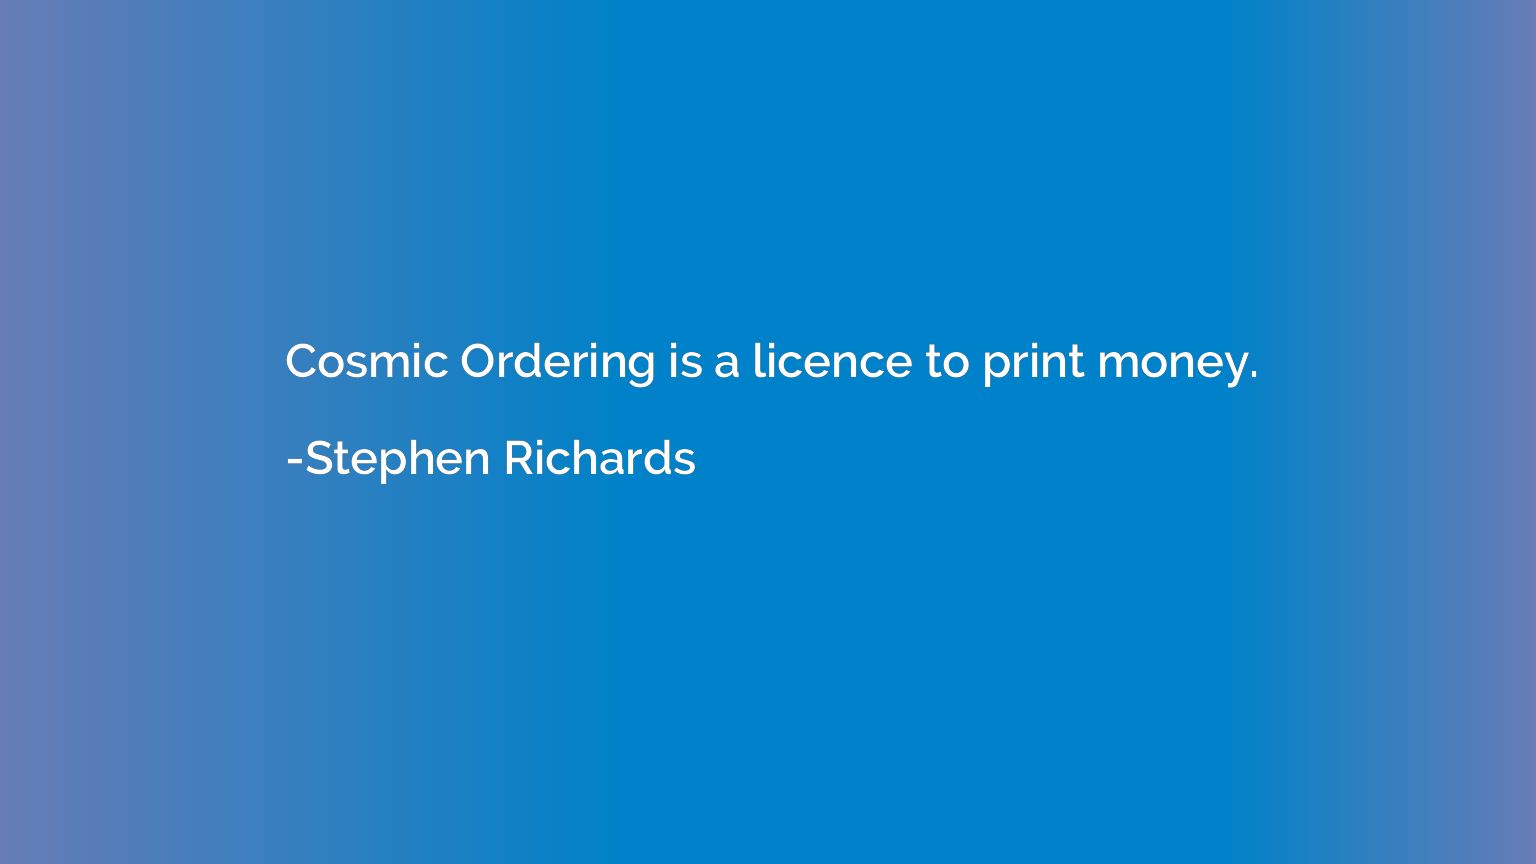 Cosmic Ordering is a licence to print money.